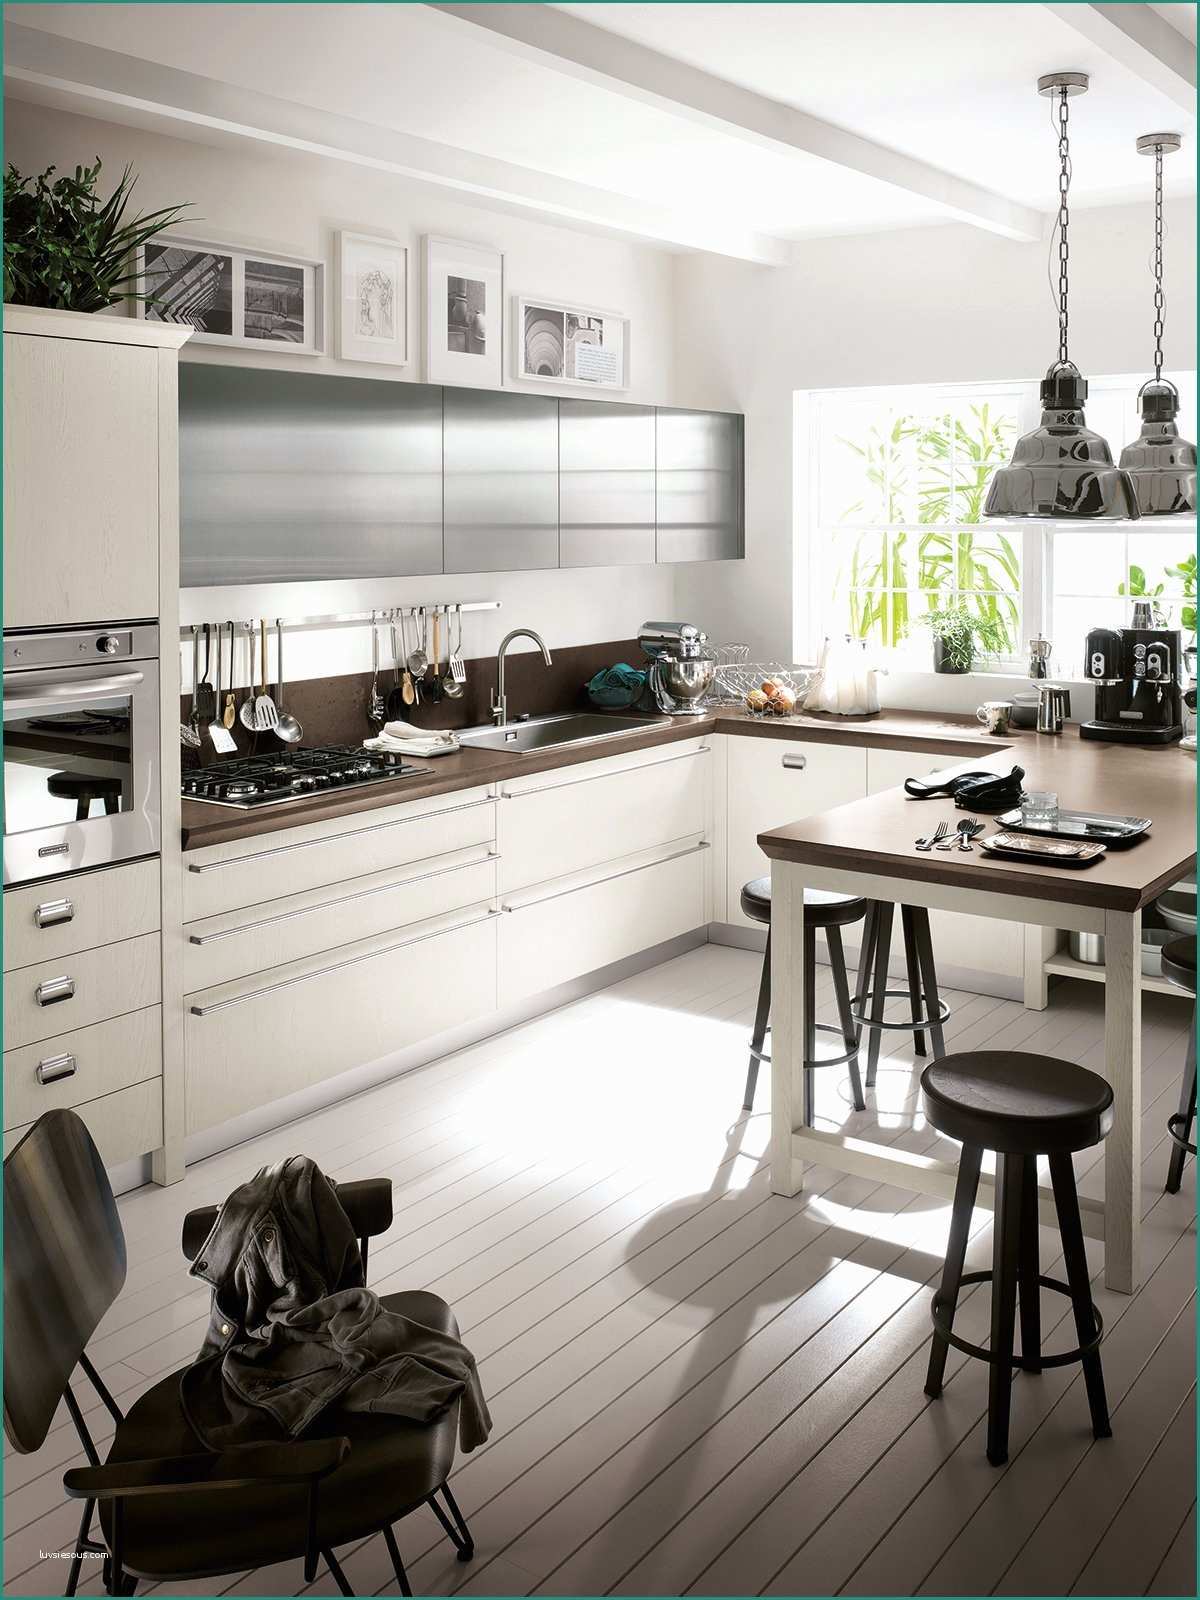 Cucine Scavolini Con isola E Cucina Diesel Simple Diesel Successful Living From Diesel with